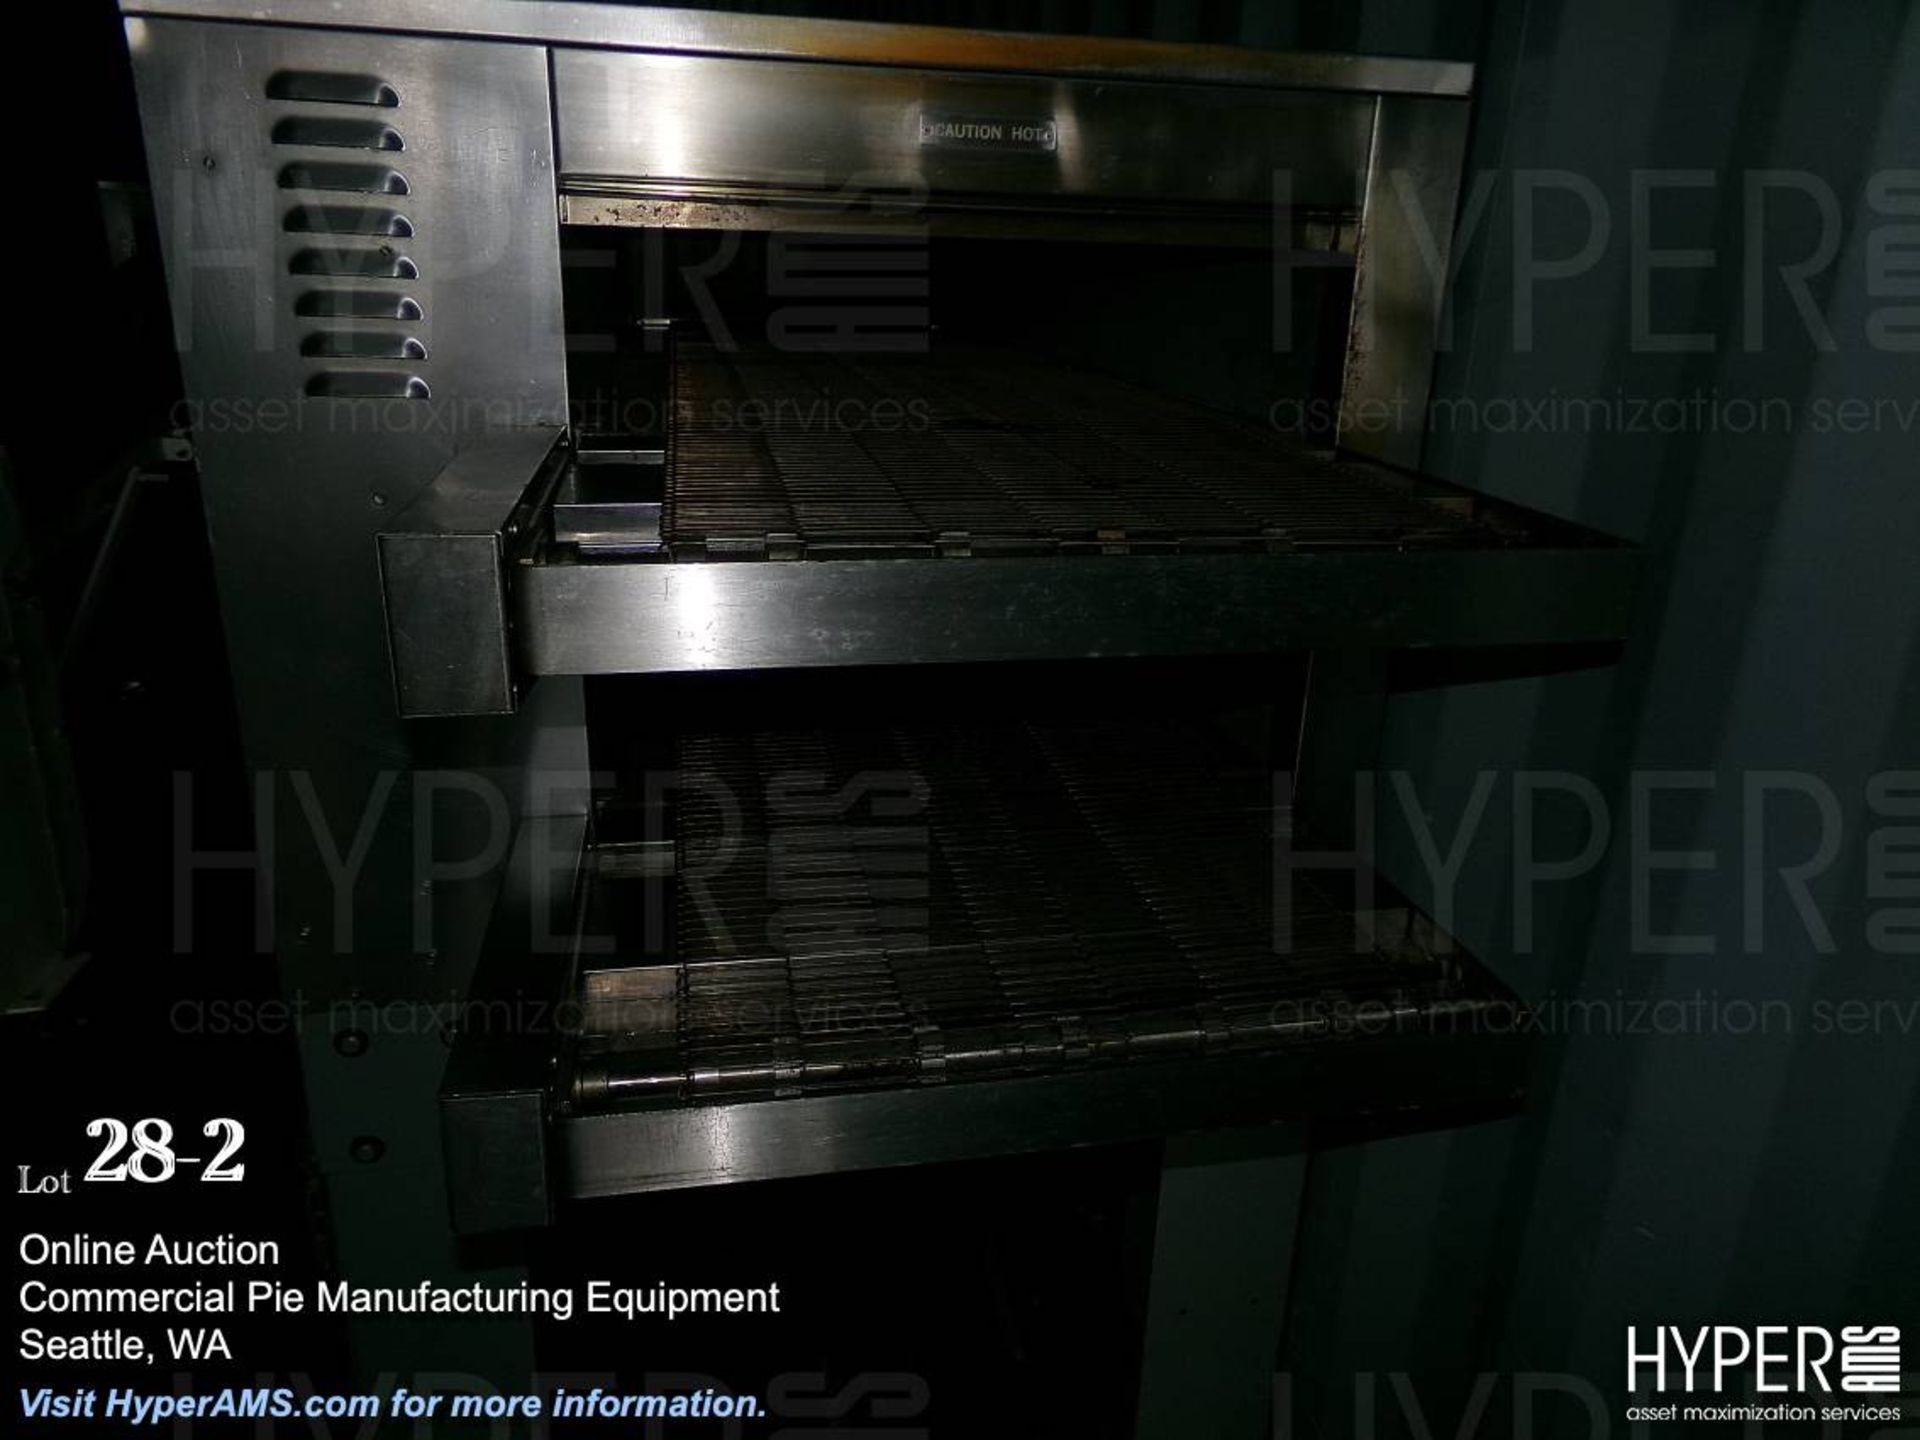 CTX Double Chamber Convection Oven Model DZ55 S/N 035710908 208V - Image 2 of 9